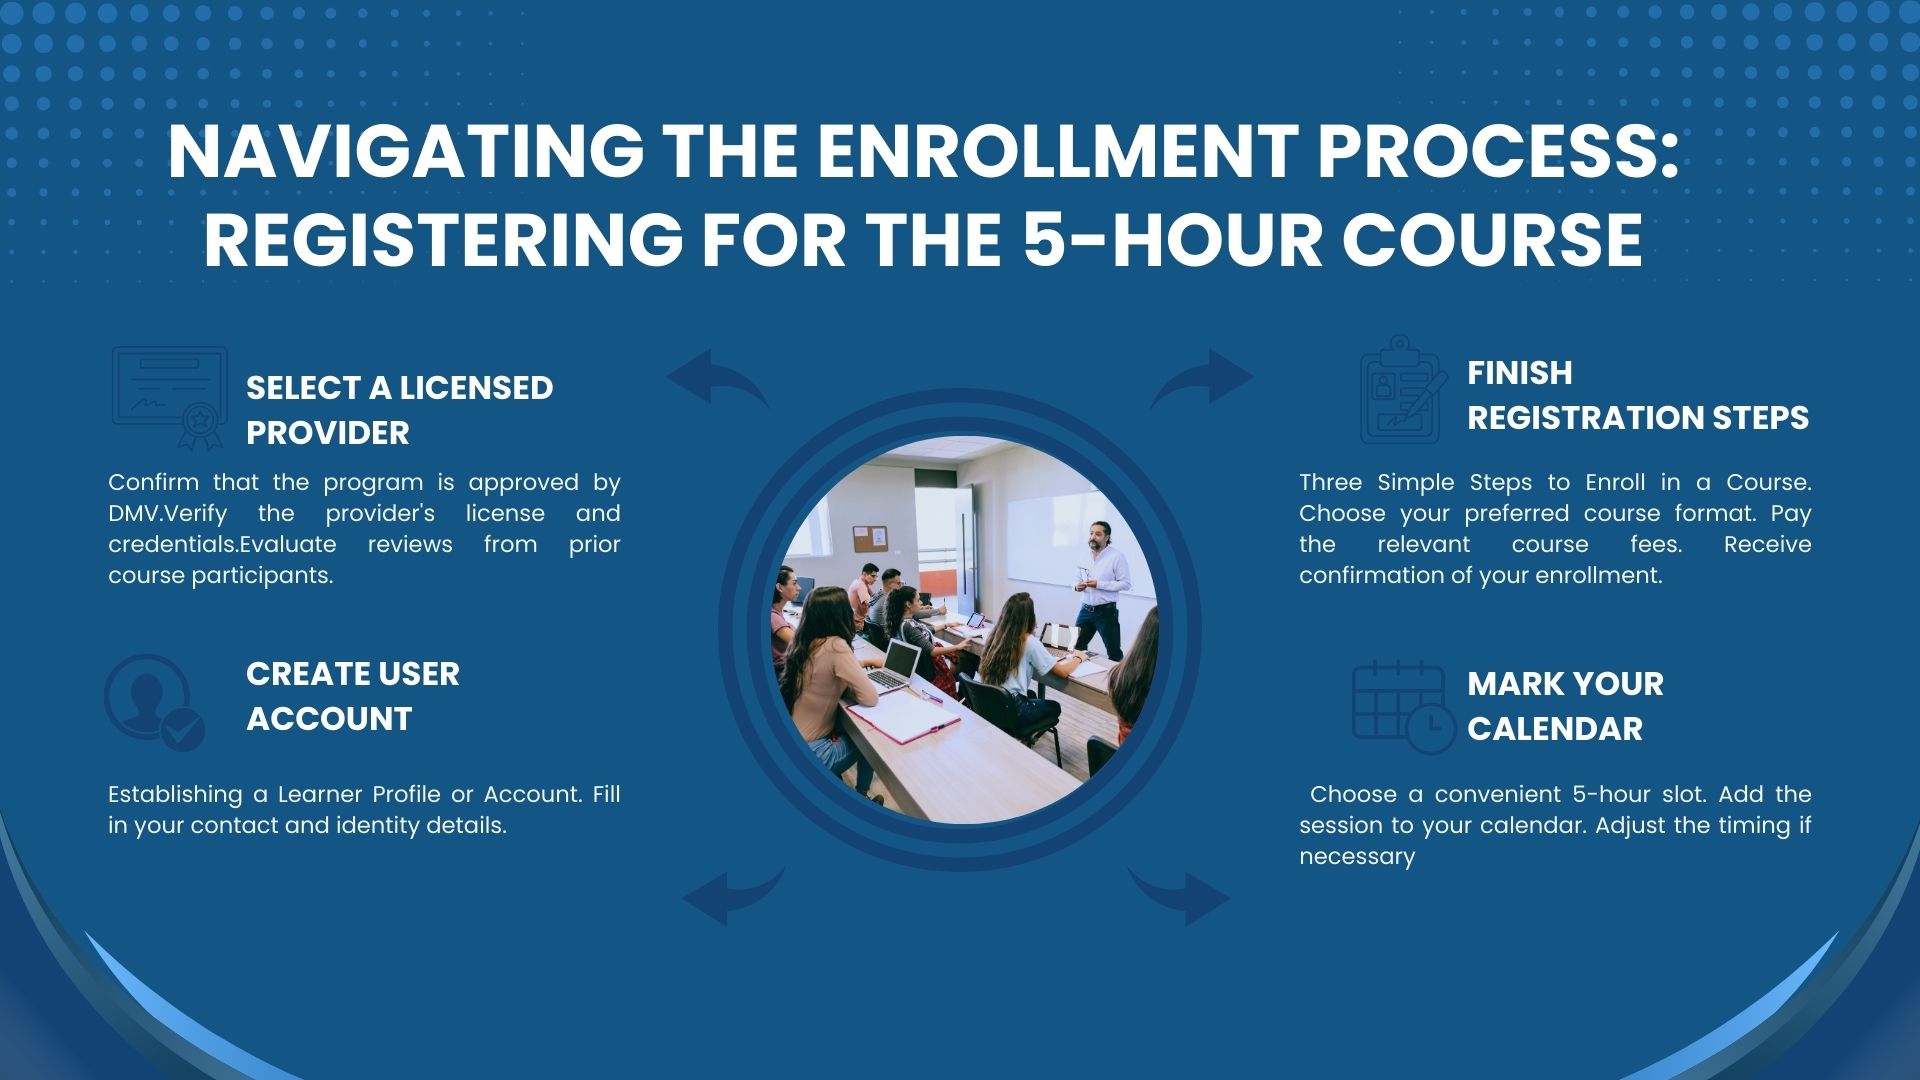 Navigating the Enrollment Process: Registering for the 5-Hour Course